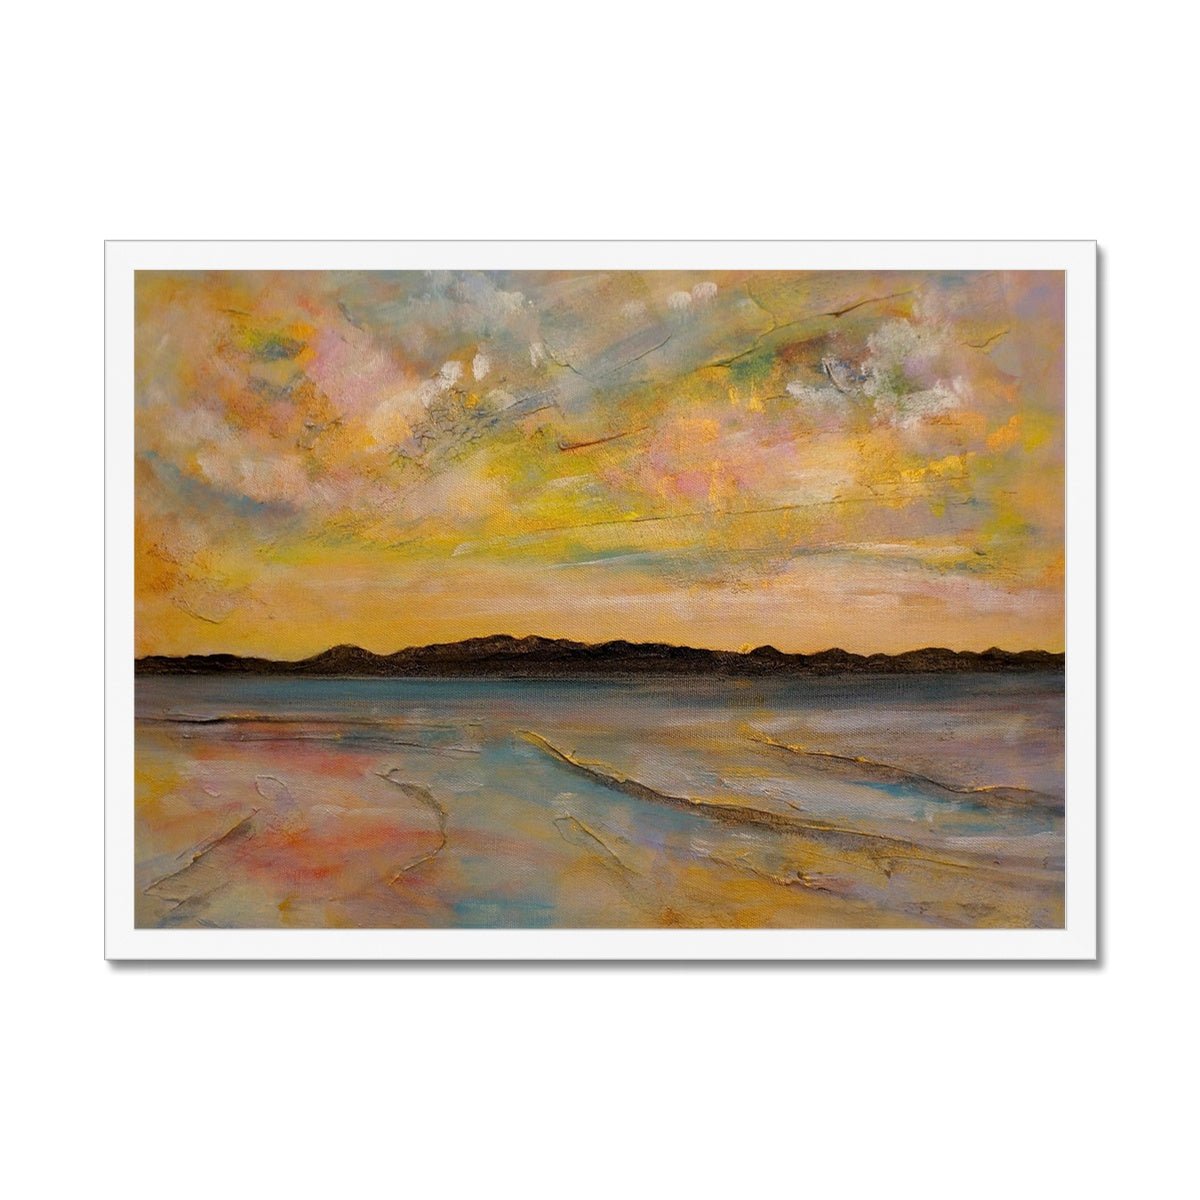 Vallay Island North Uist Painting | Framed Prints From Scotland-Framed Prints-Hebridean Islands Art Gallery-A2 Landscape-White Frame-Paintings, Prints, Homeware, Art Gifts From Scotland By Scottish Artist Kevin Hunter